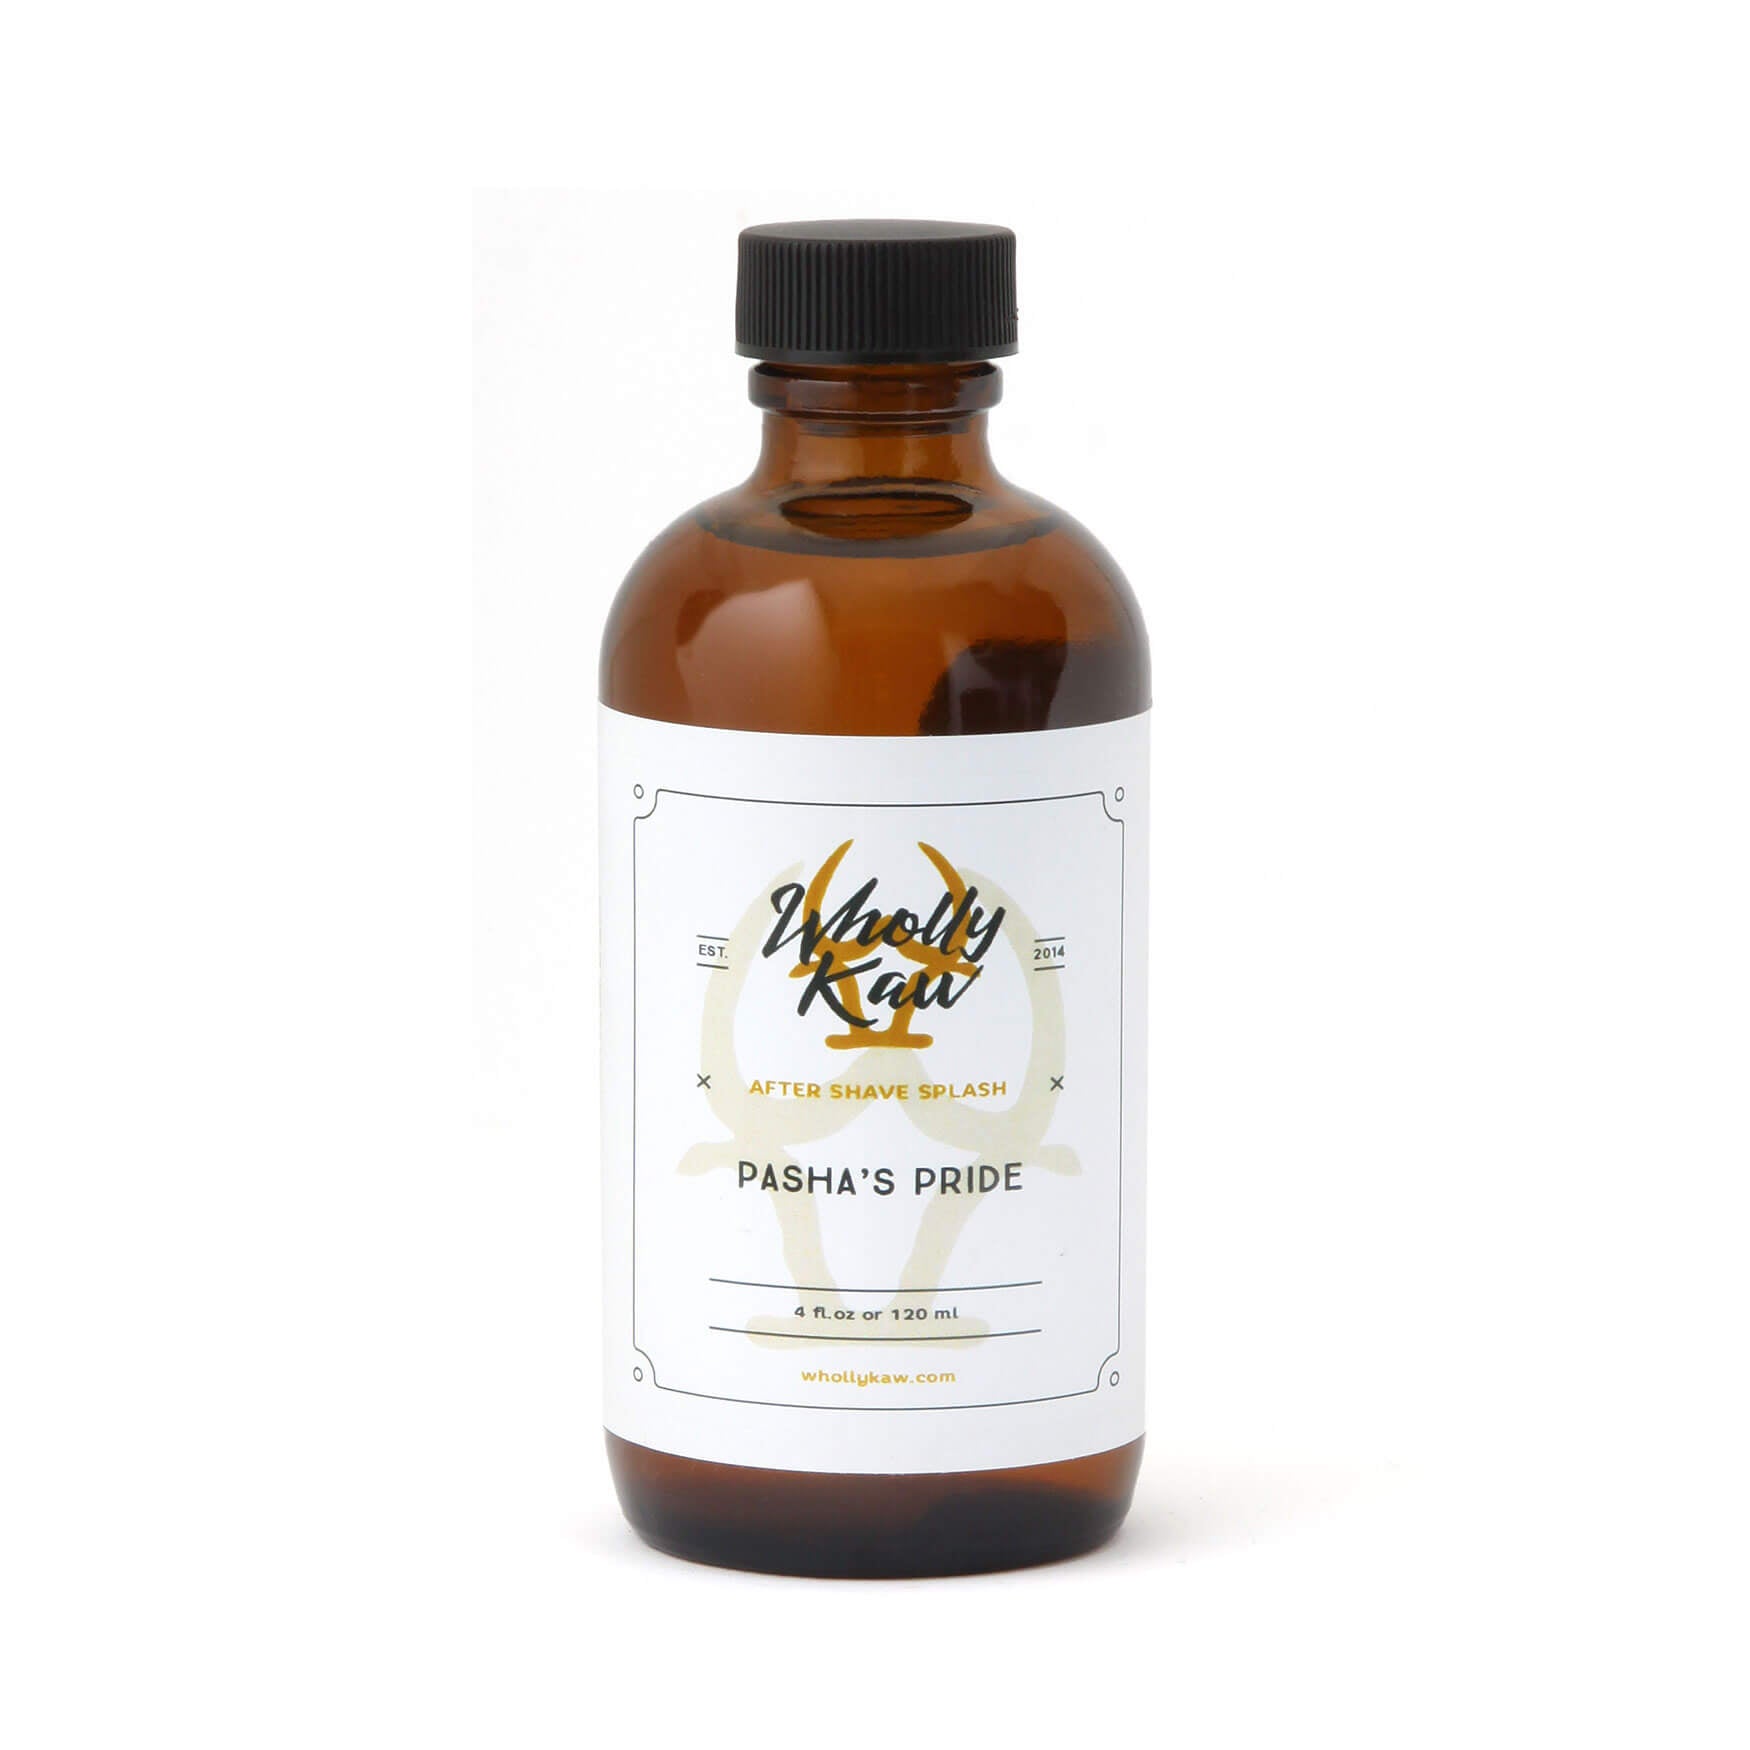 Wholly Kaw Pasha's Pride Aftershave Splash